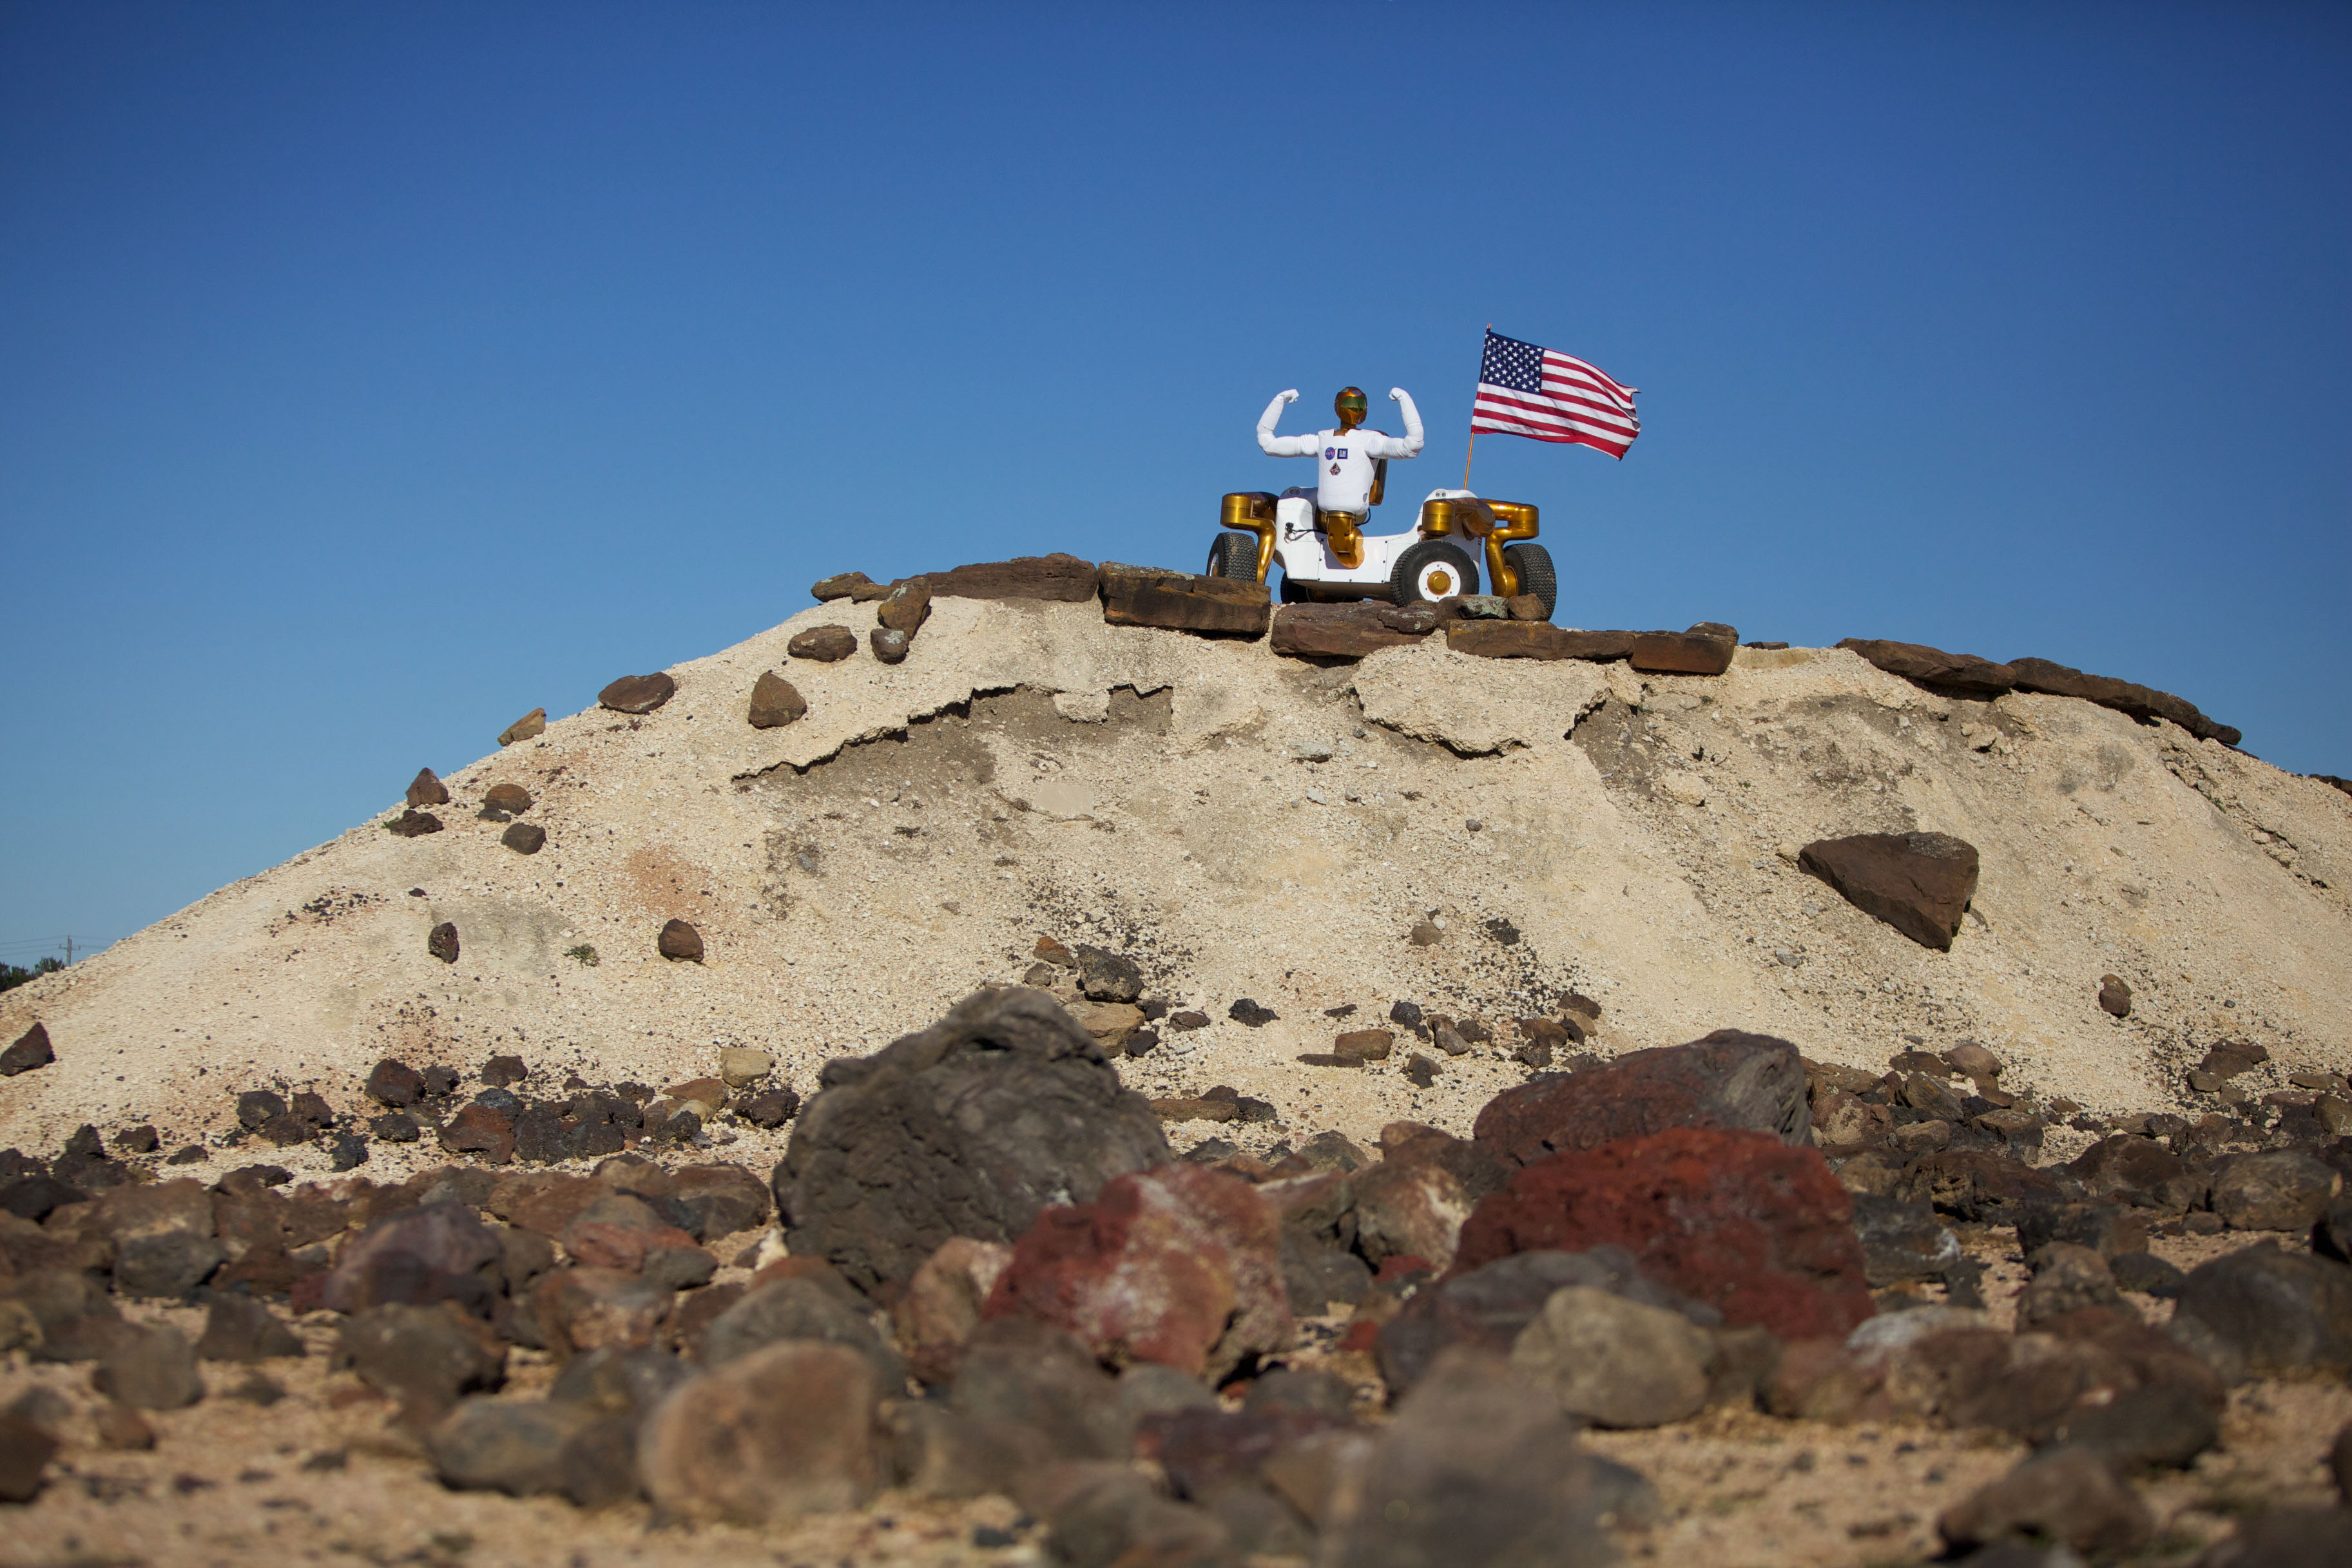 Robonaut 2 poses atop its new wheeled base, Centaur 2, at the Johnson Space Center Planetary Analog Test Site.